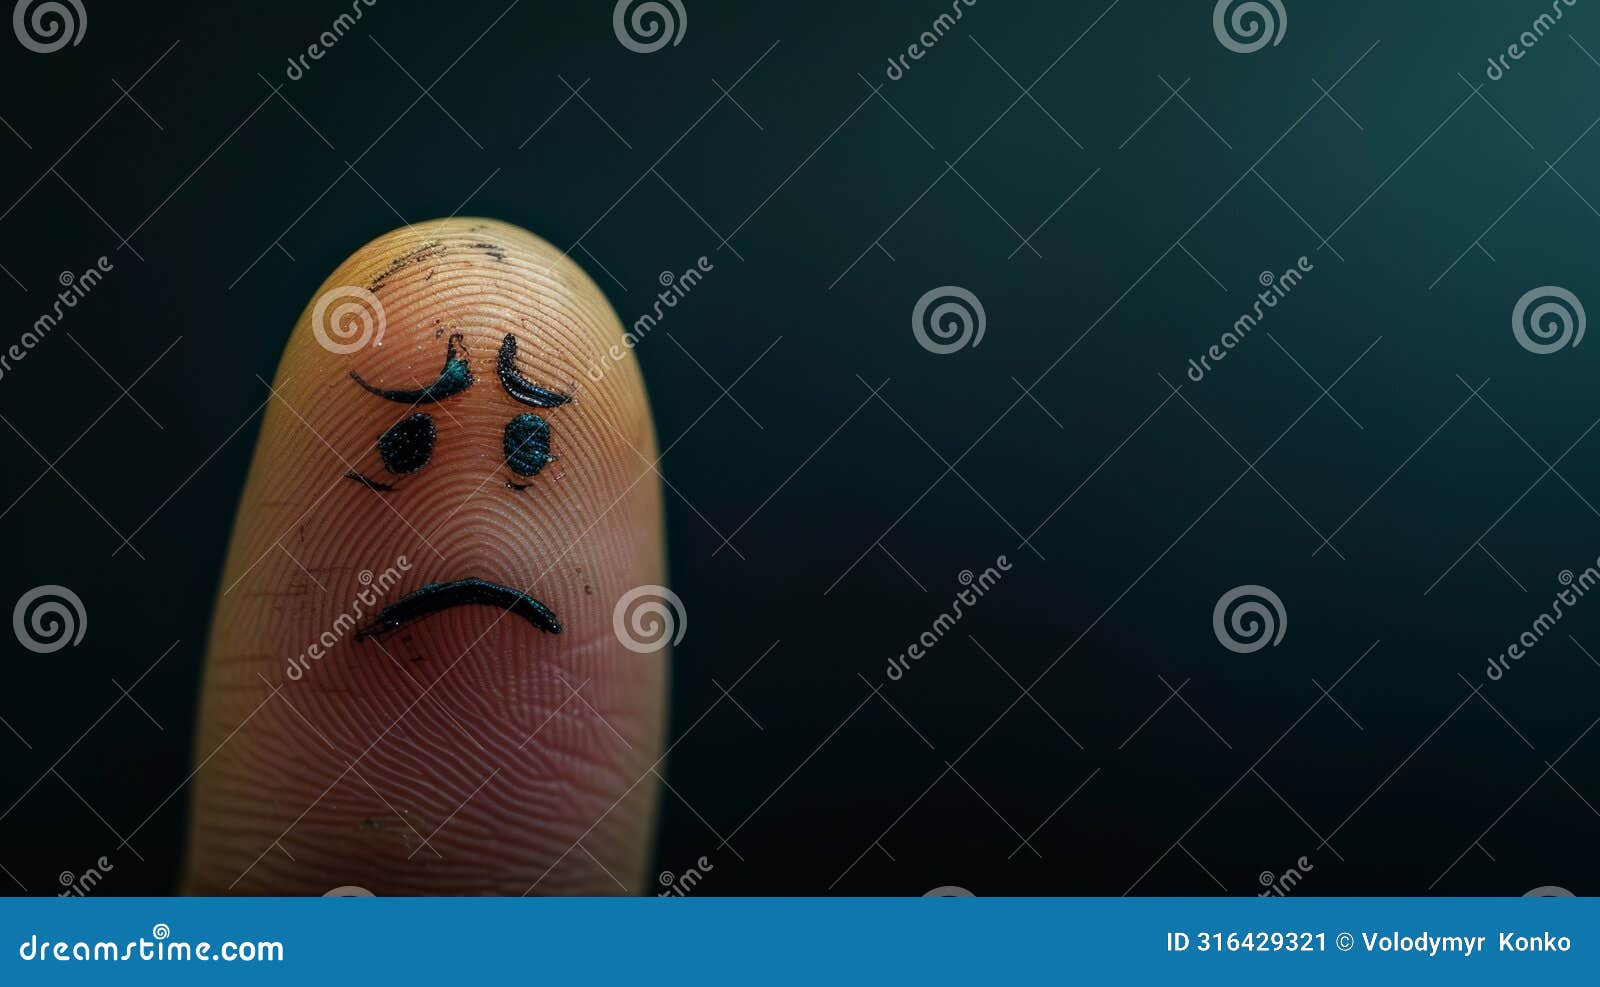 close-up of a sad face drawn on a fingertip